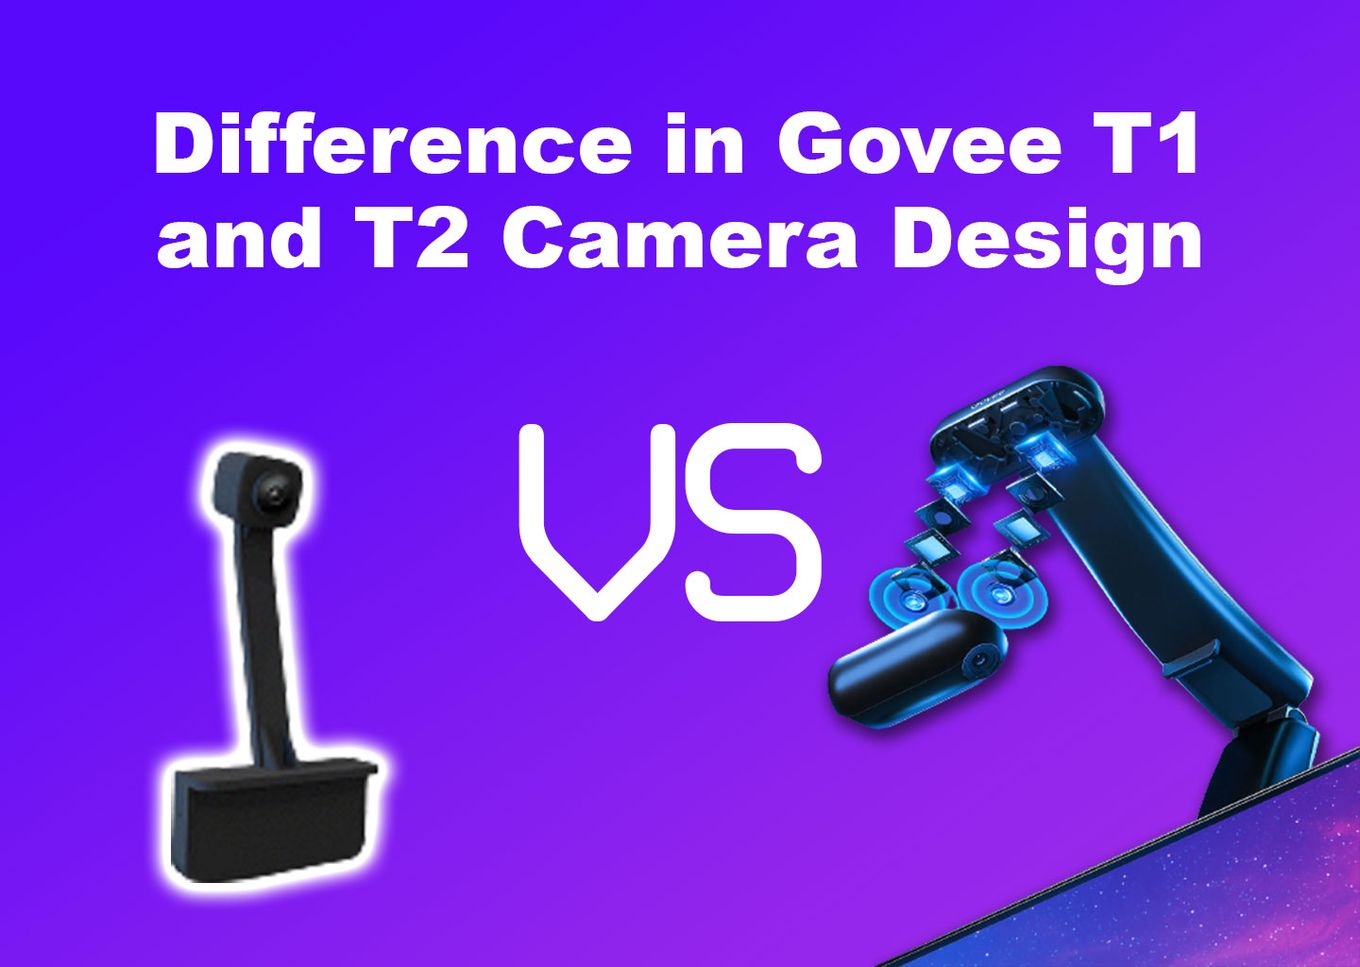 Difference in Govee T1 and T2 Camera Design